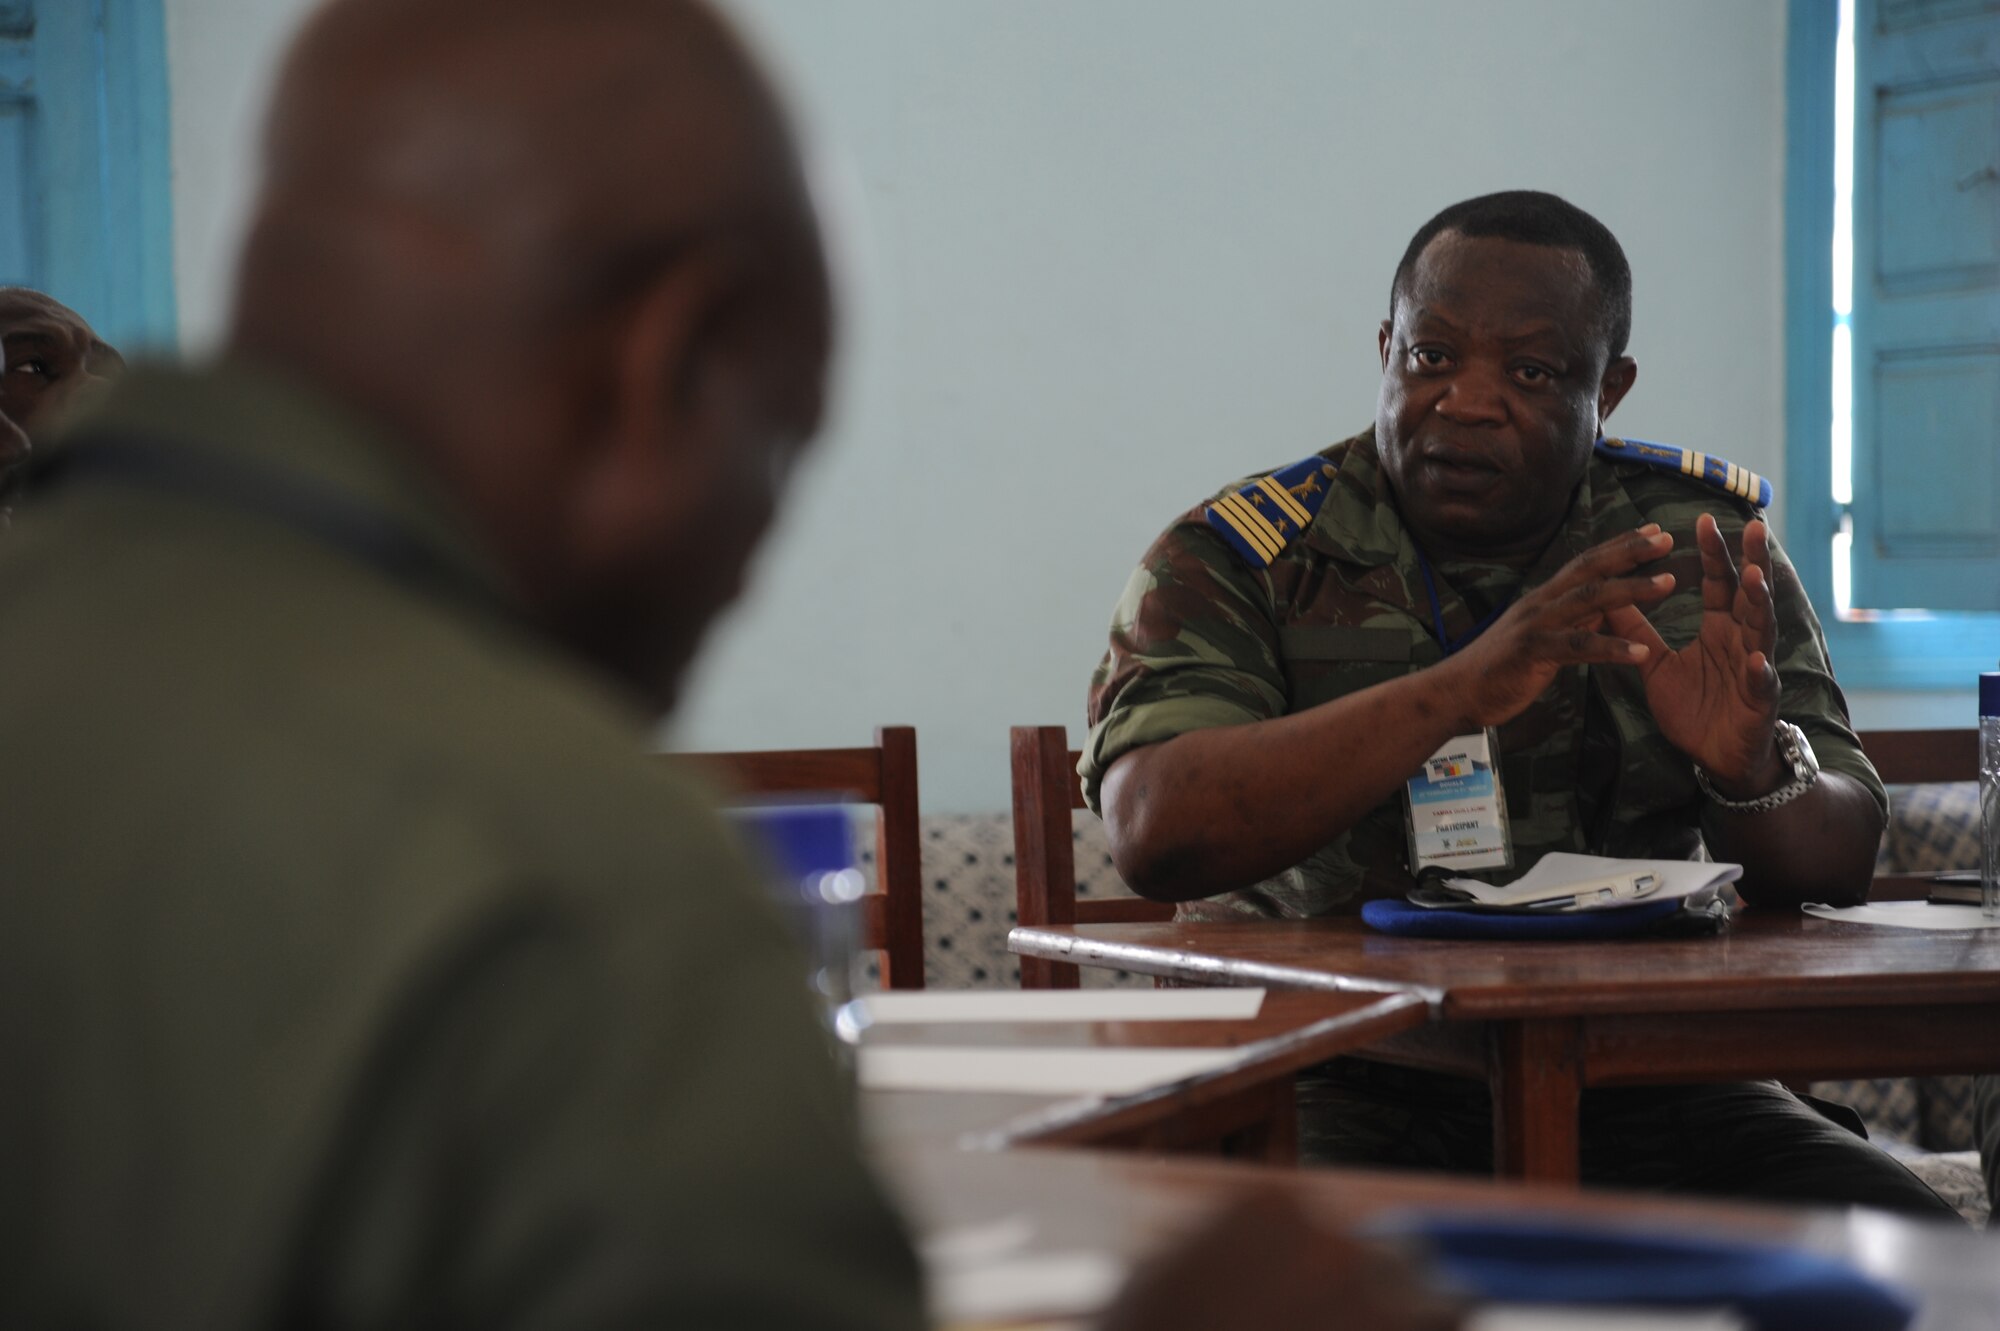 DOUALA, CAMEROON – Cameroon Air Force Col. Yamba Guillaume, C-130 pilot, and U.S. Air Force air advisors assigned to the 818th Mobility Support Advisory Squadron, Joint Base McGuire-Dix-Lakehurst, N.J., share ideas regarding aerial delivery systems at Douala Air Force Base, Douala, Cameroon, Feb. 21, 2013. Central Accord 2013 is a joint exercise in which U.S., Cameroon and neighboring Central African militaries partner to promote regional cooperation while and increasing aerial resupply and medical readiness capacity. (Photo by Master Sgt. Stan Parker, 621st CRW Public Affairs)